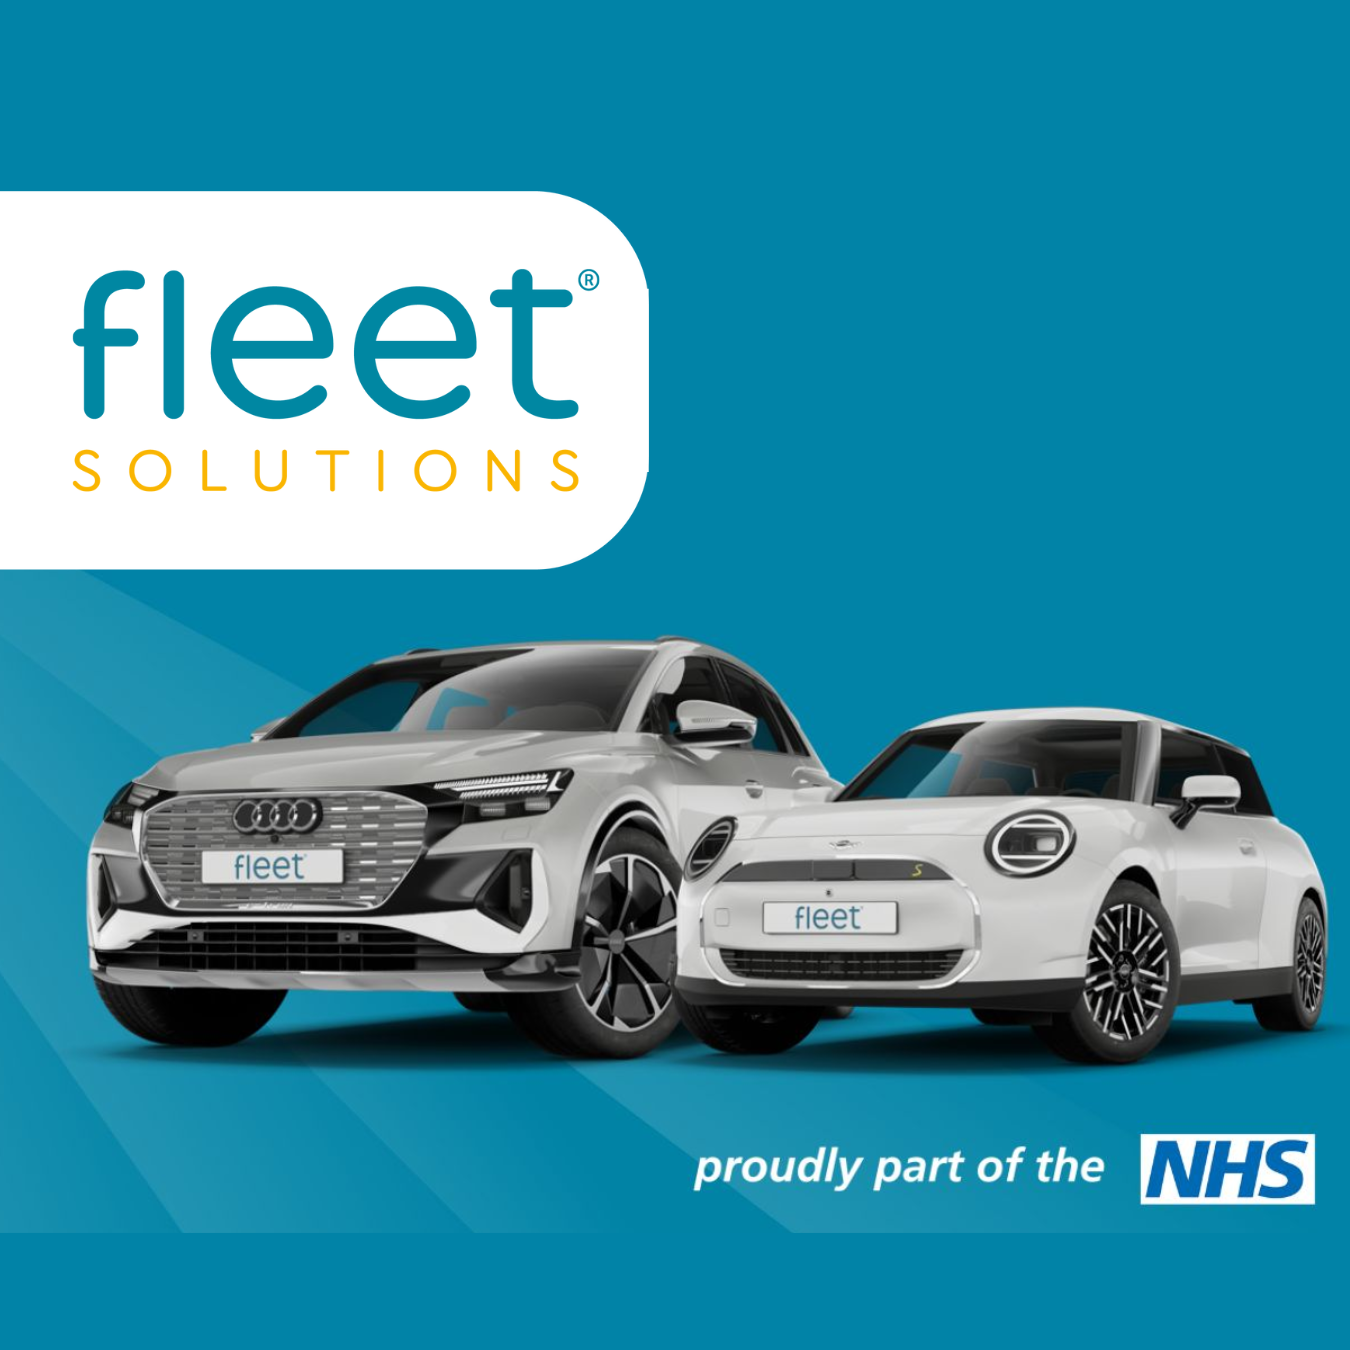 Fleet solutions promo graphic with two cars